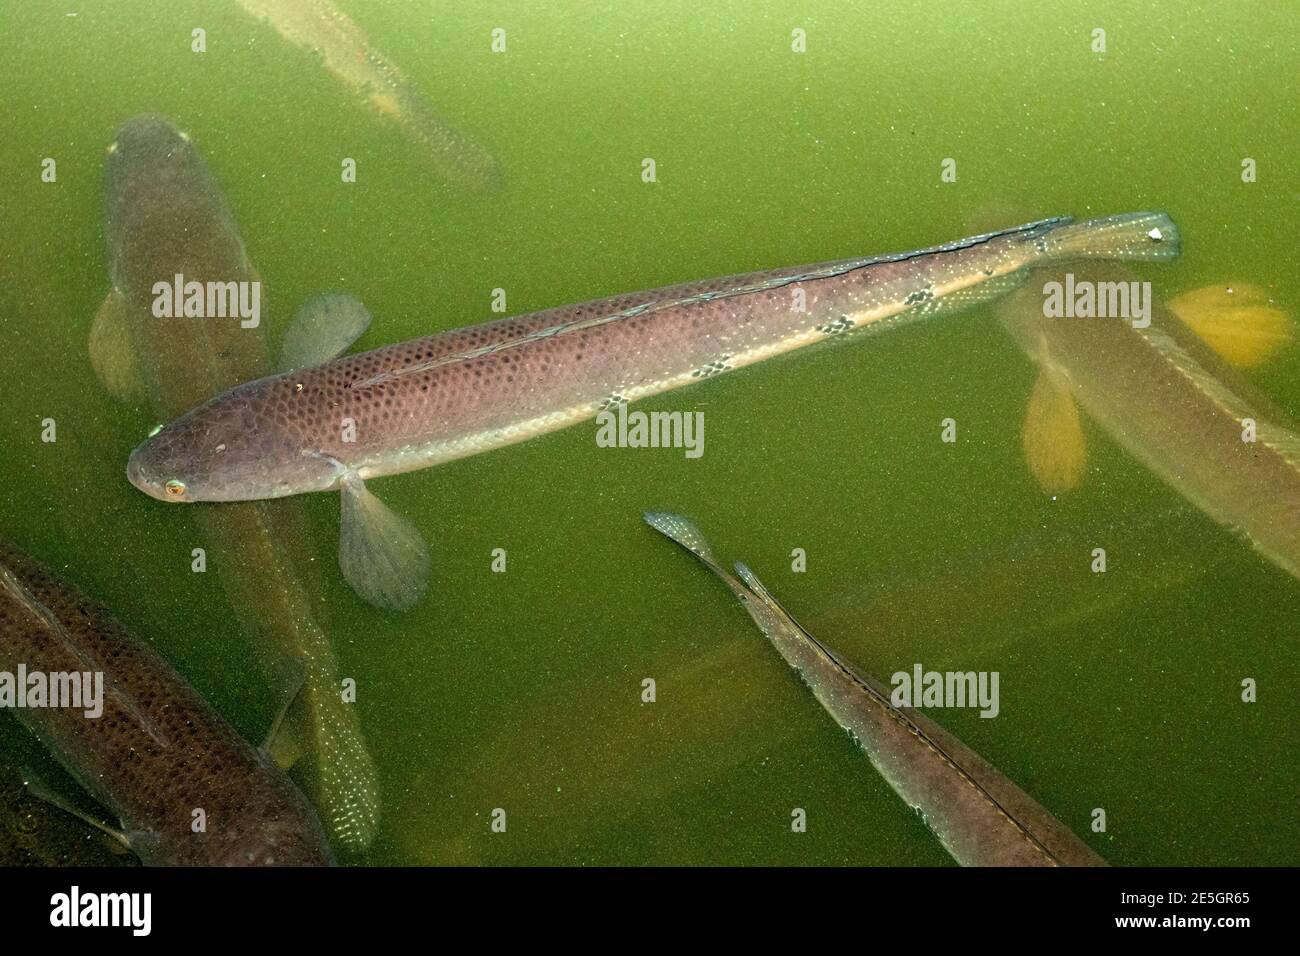 The Great snakehead or Channa marulius Fish of Channidae family Stock Photo